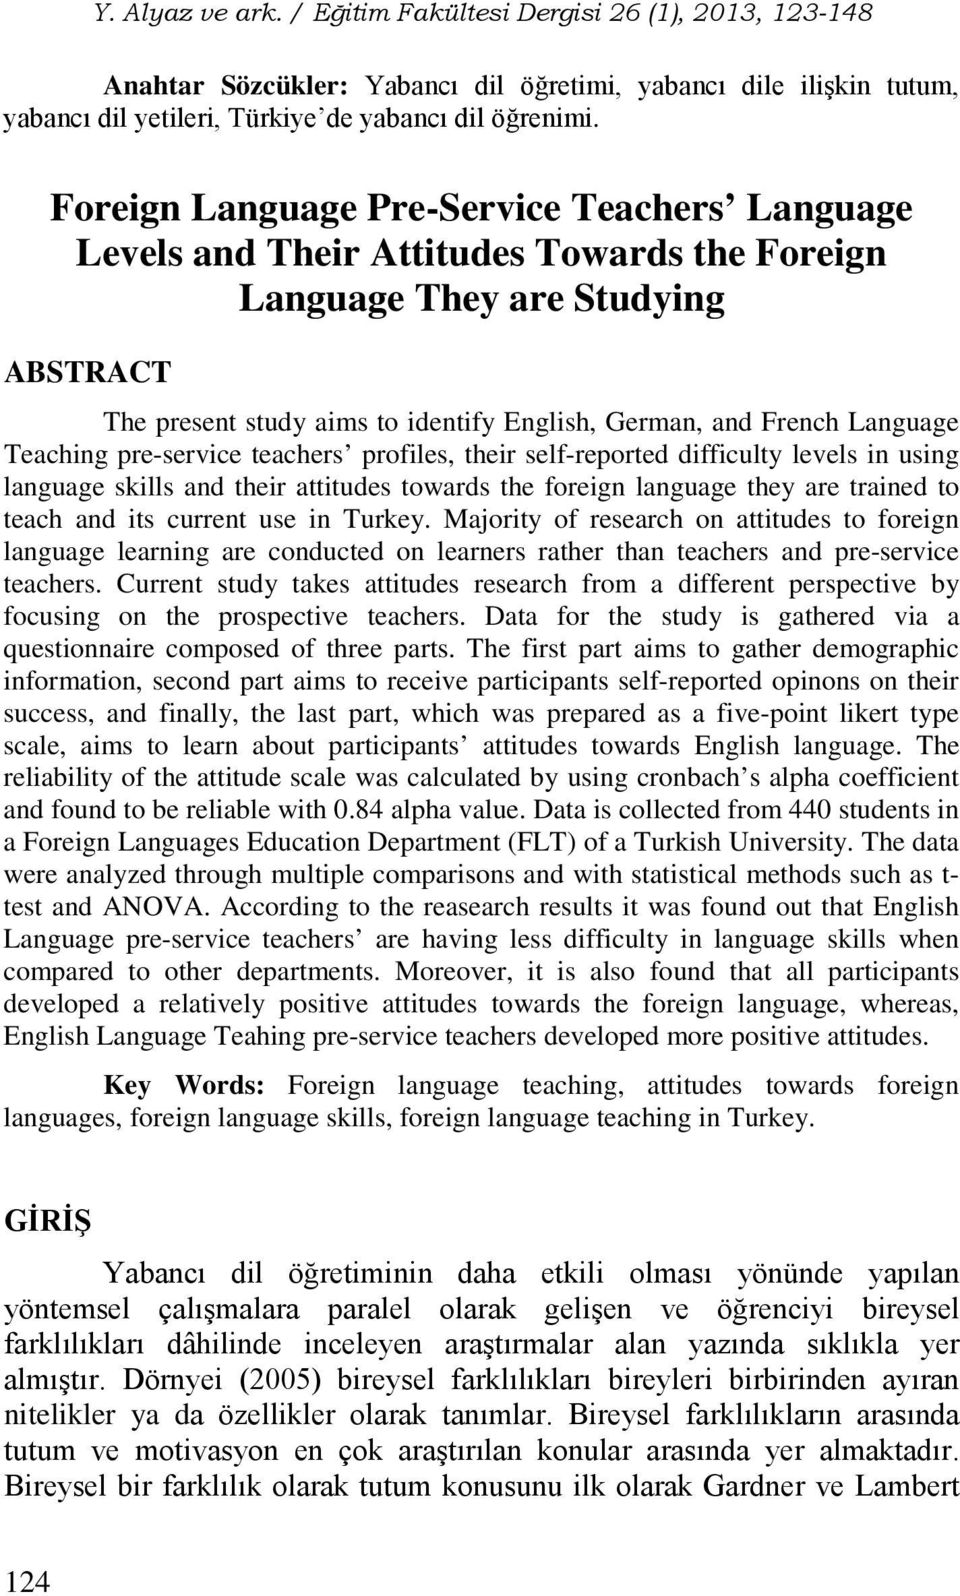 Language Teaching pre-service teachers profiles, their self-reported difficulty levels in using language skills and their attitudes towards the foreign language they are trained to teach and its